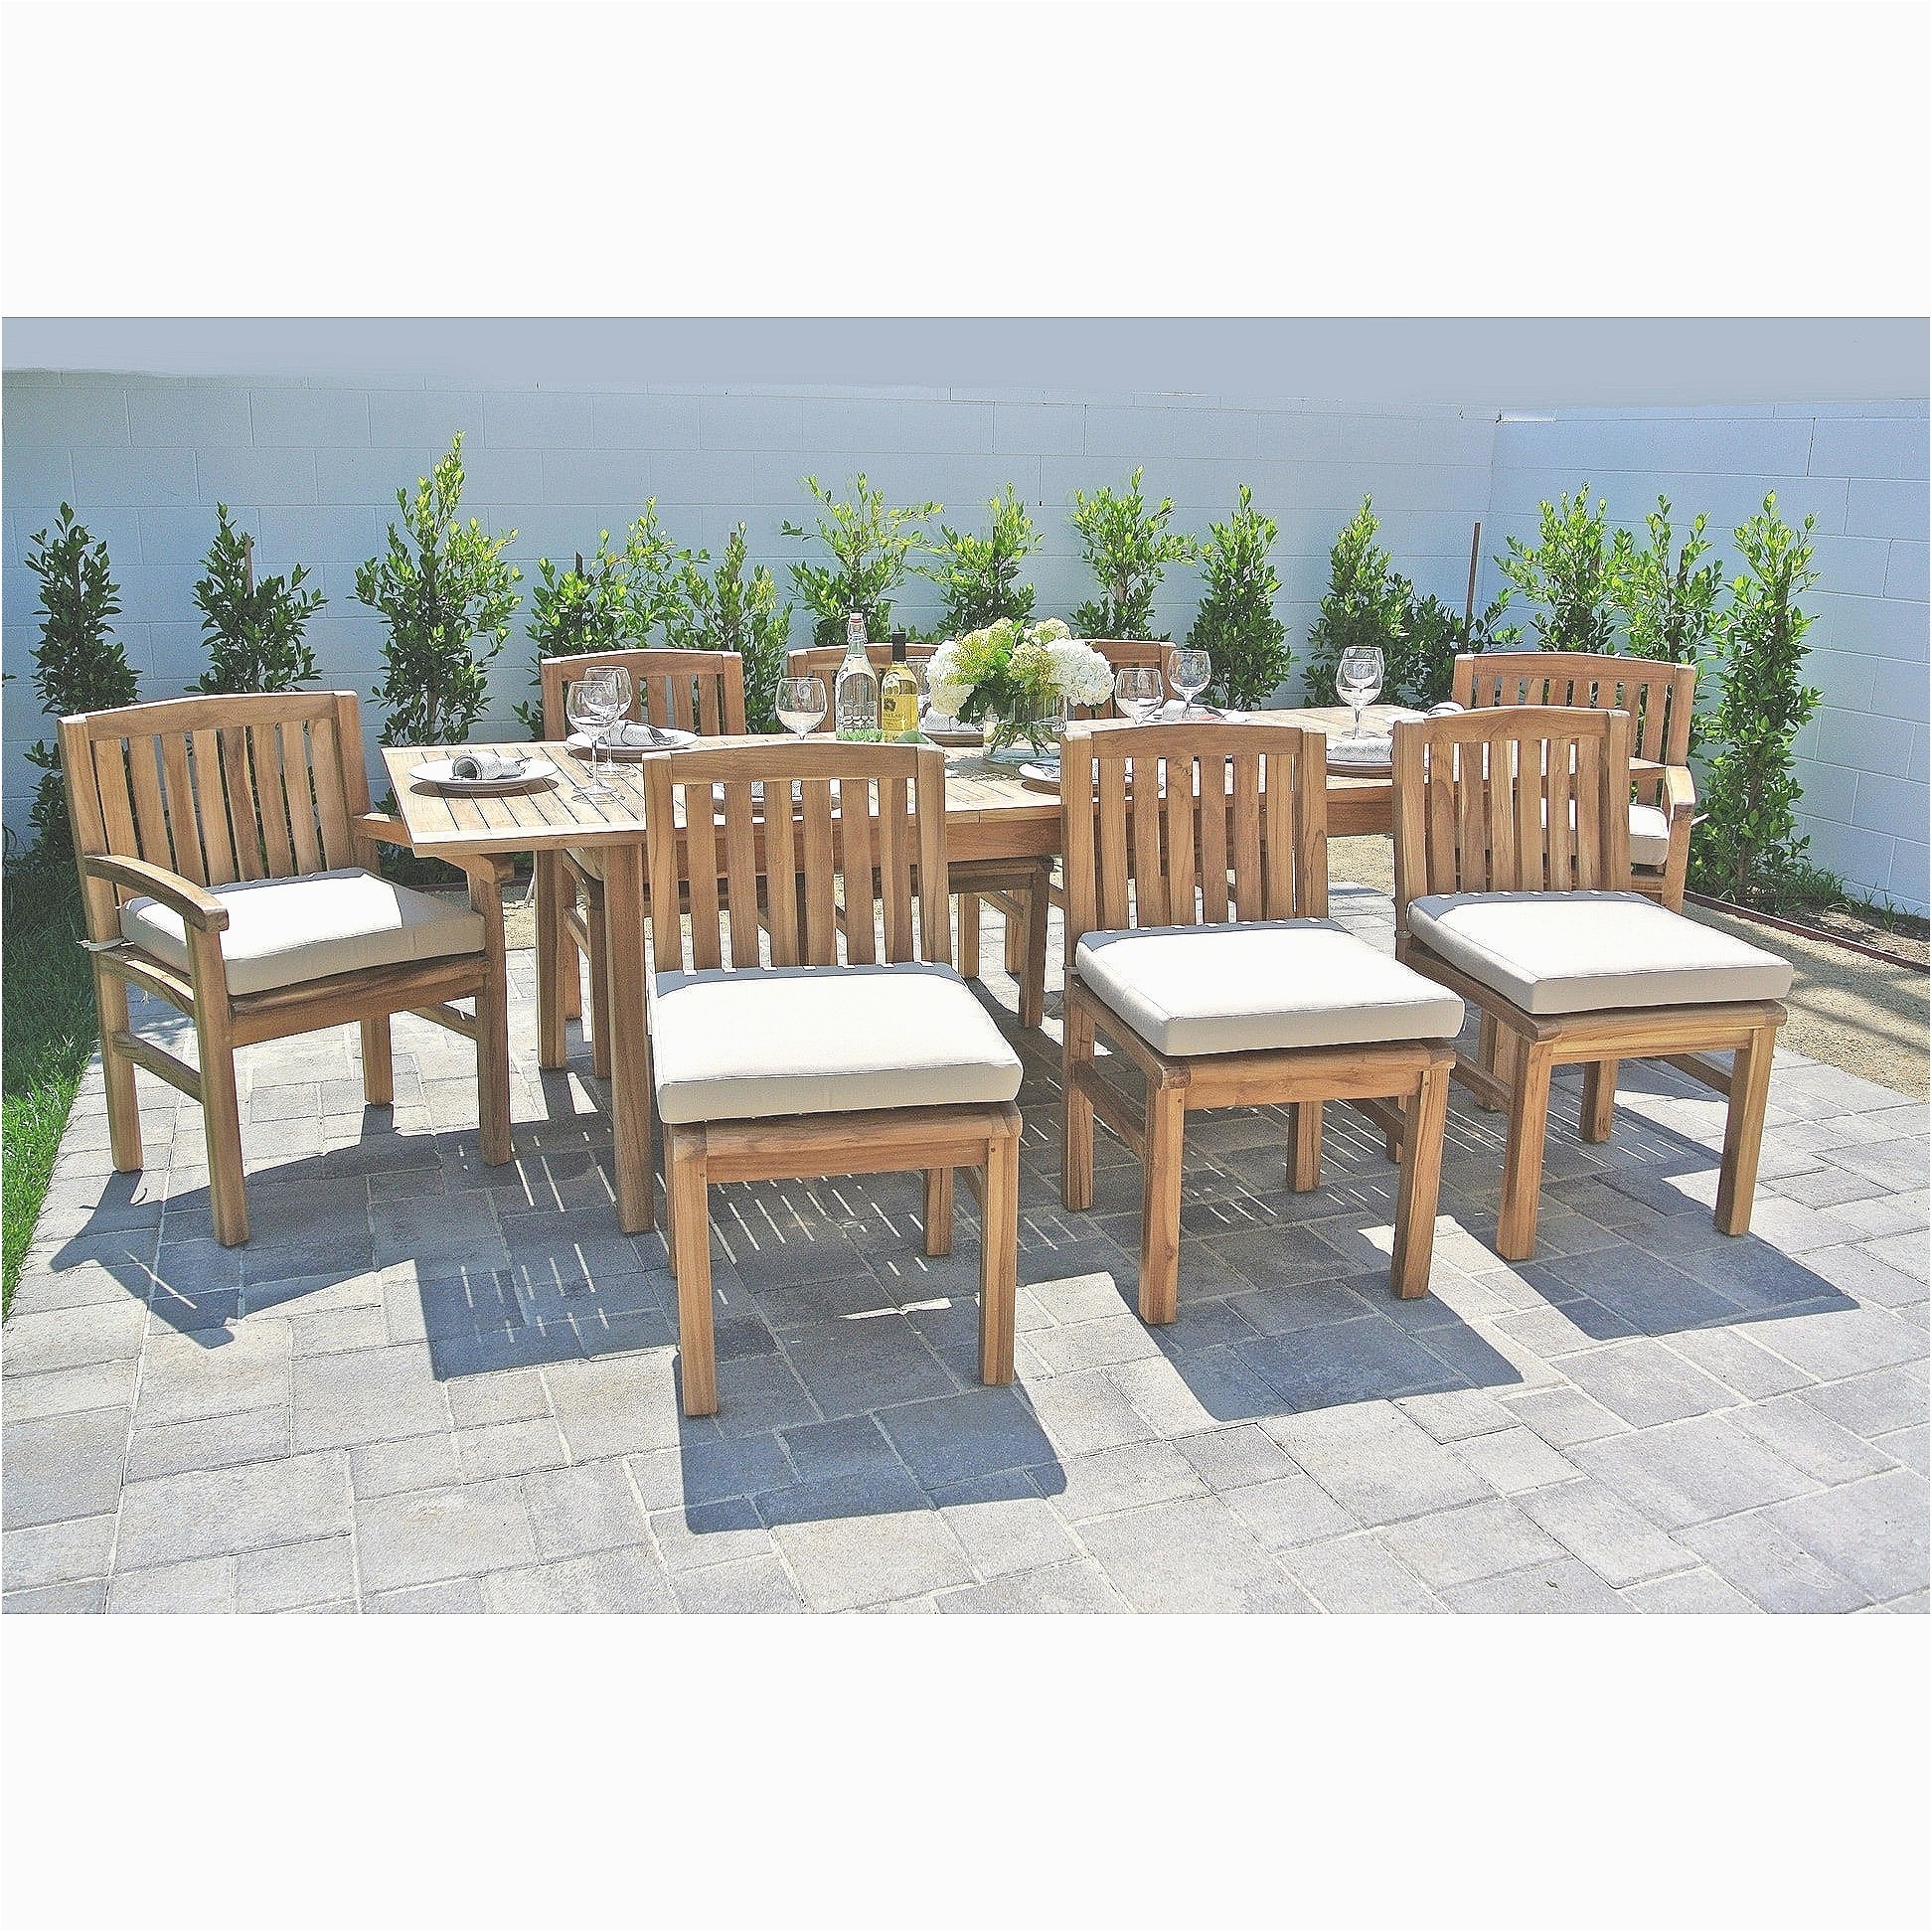 outdoor patio furniture sets menards latest patio box best wicker outdoor sofa 0d patio chairs outdoor furniture naples fl